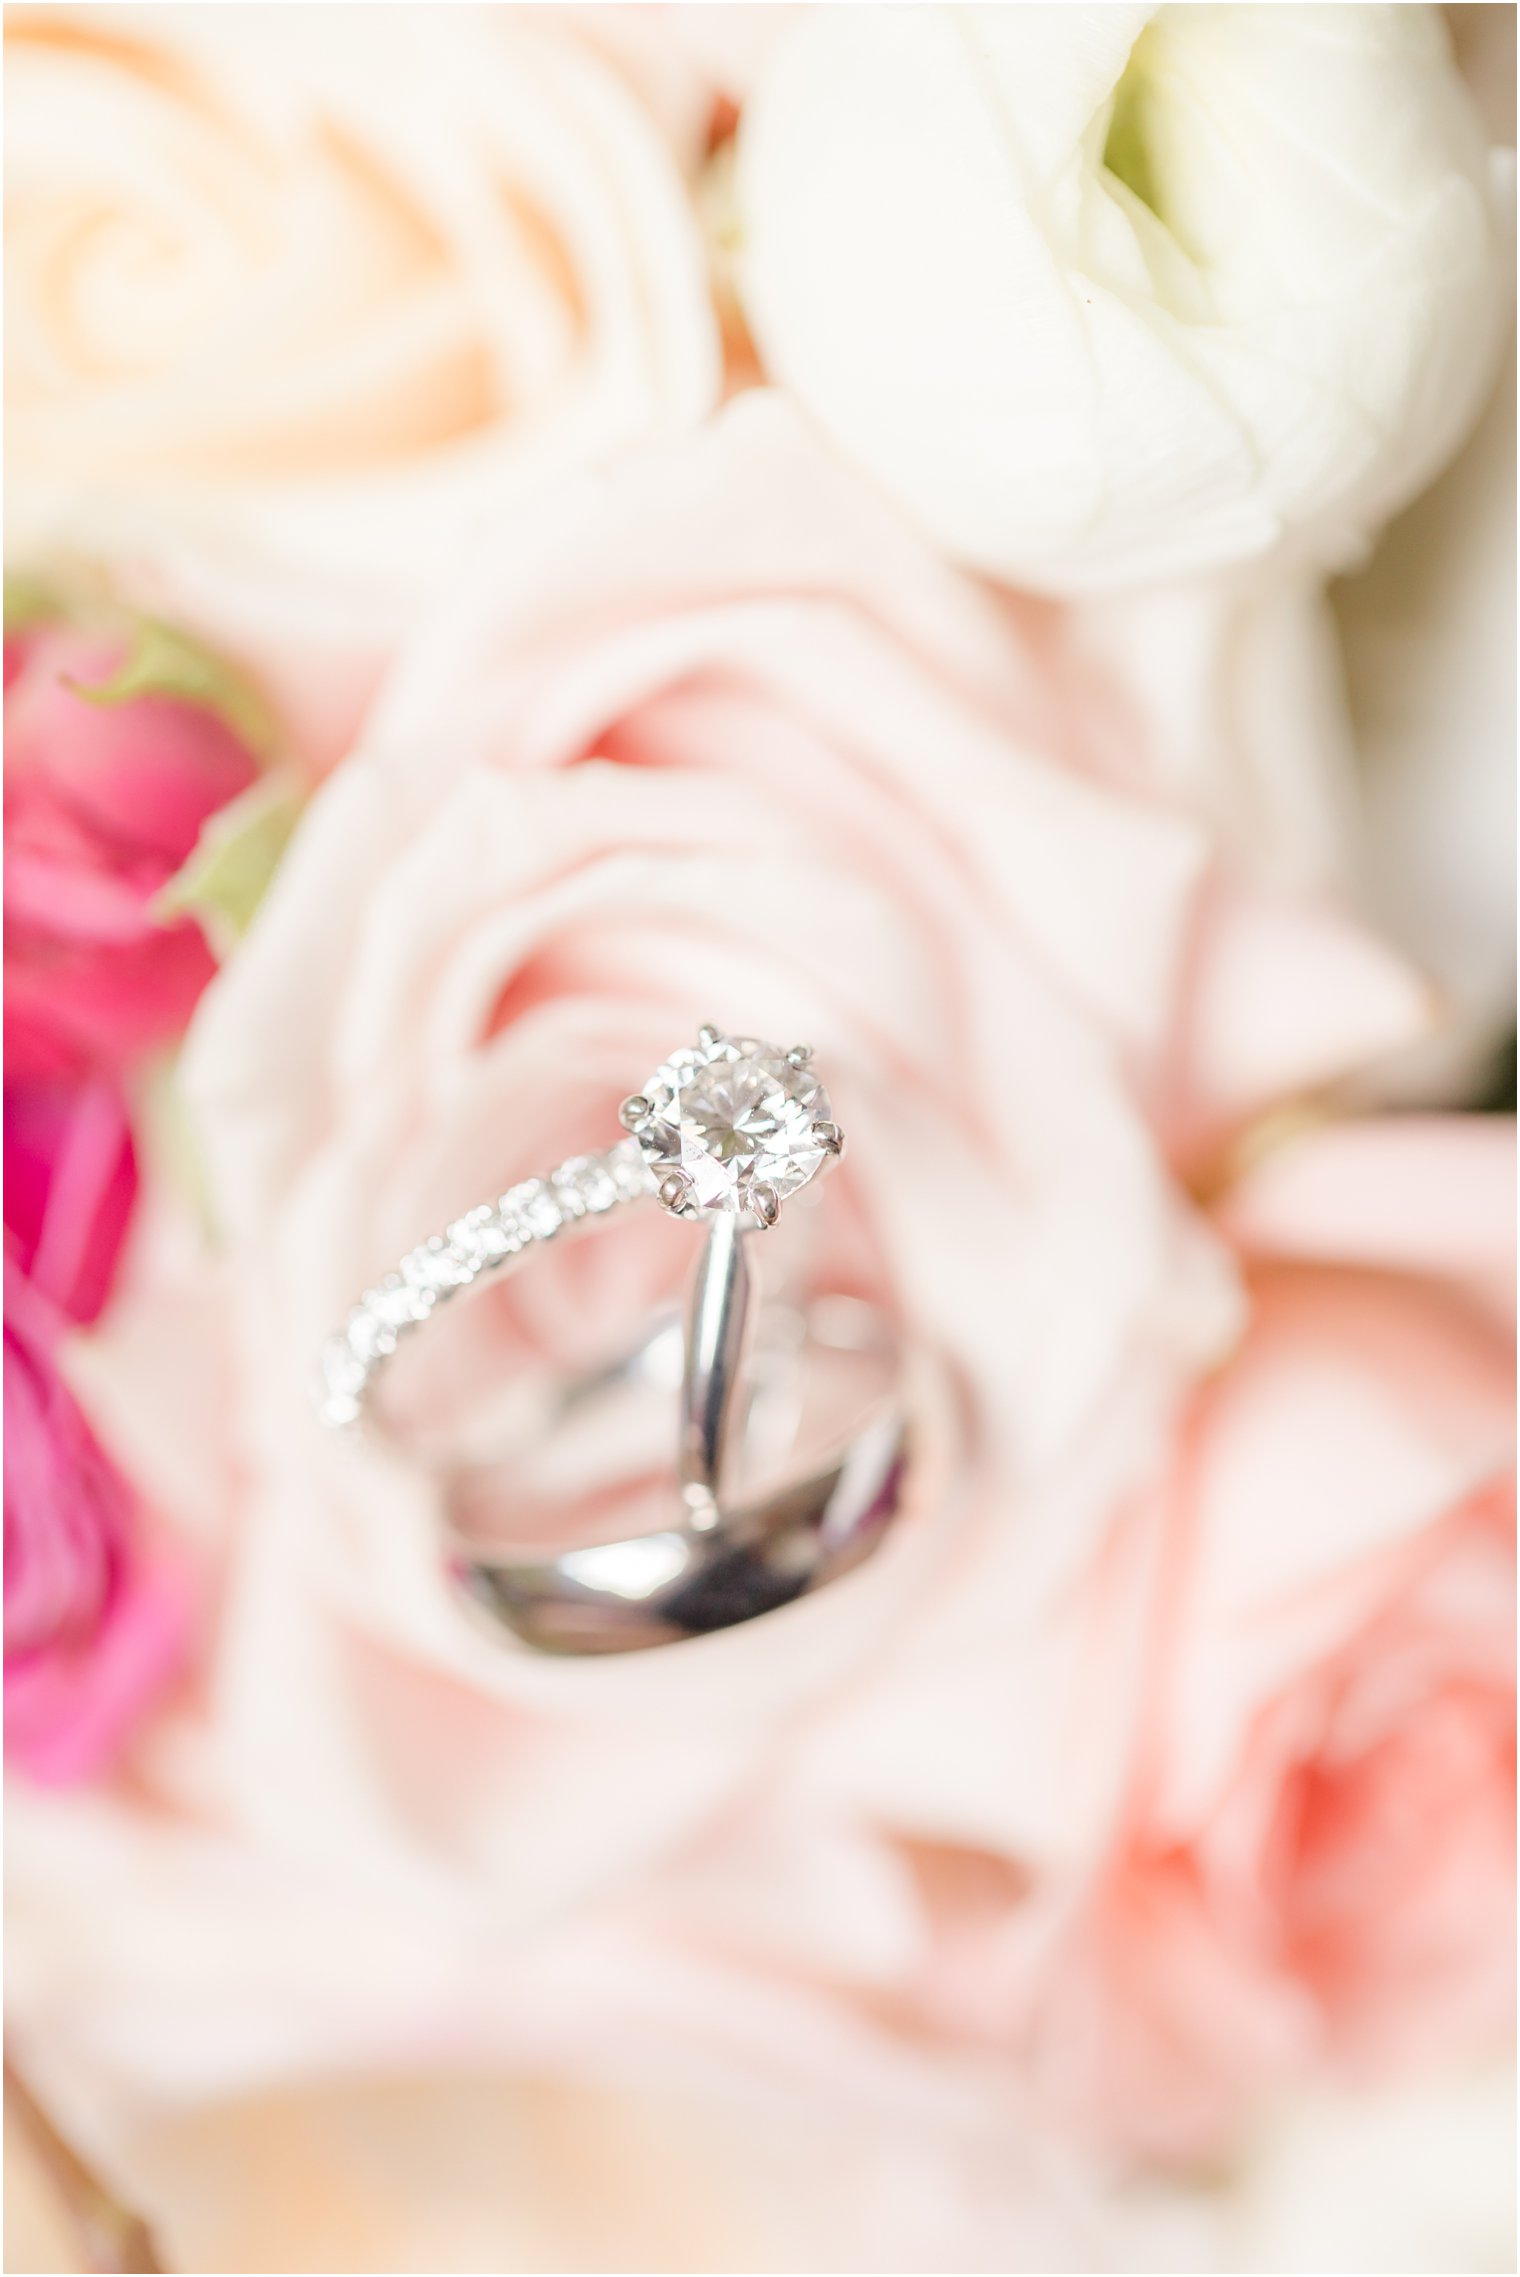 Wedding bands in bouquet | Stone House at Stirling Ridge Wedding Photography by Idalia Photography